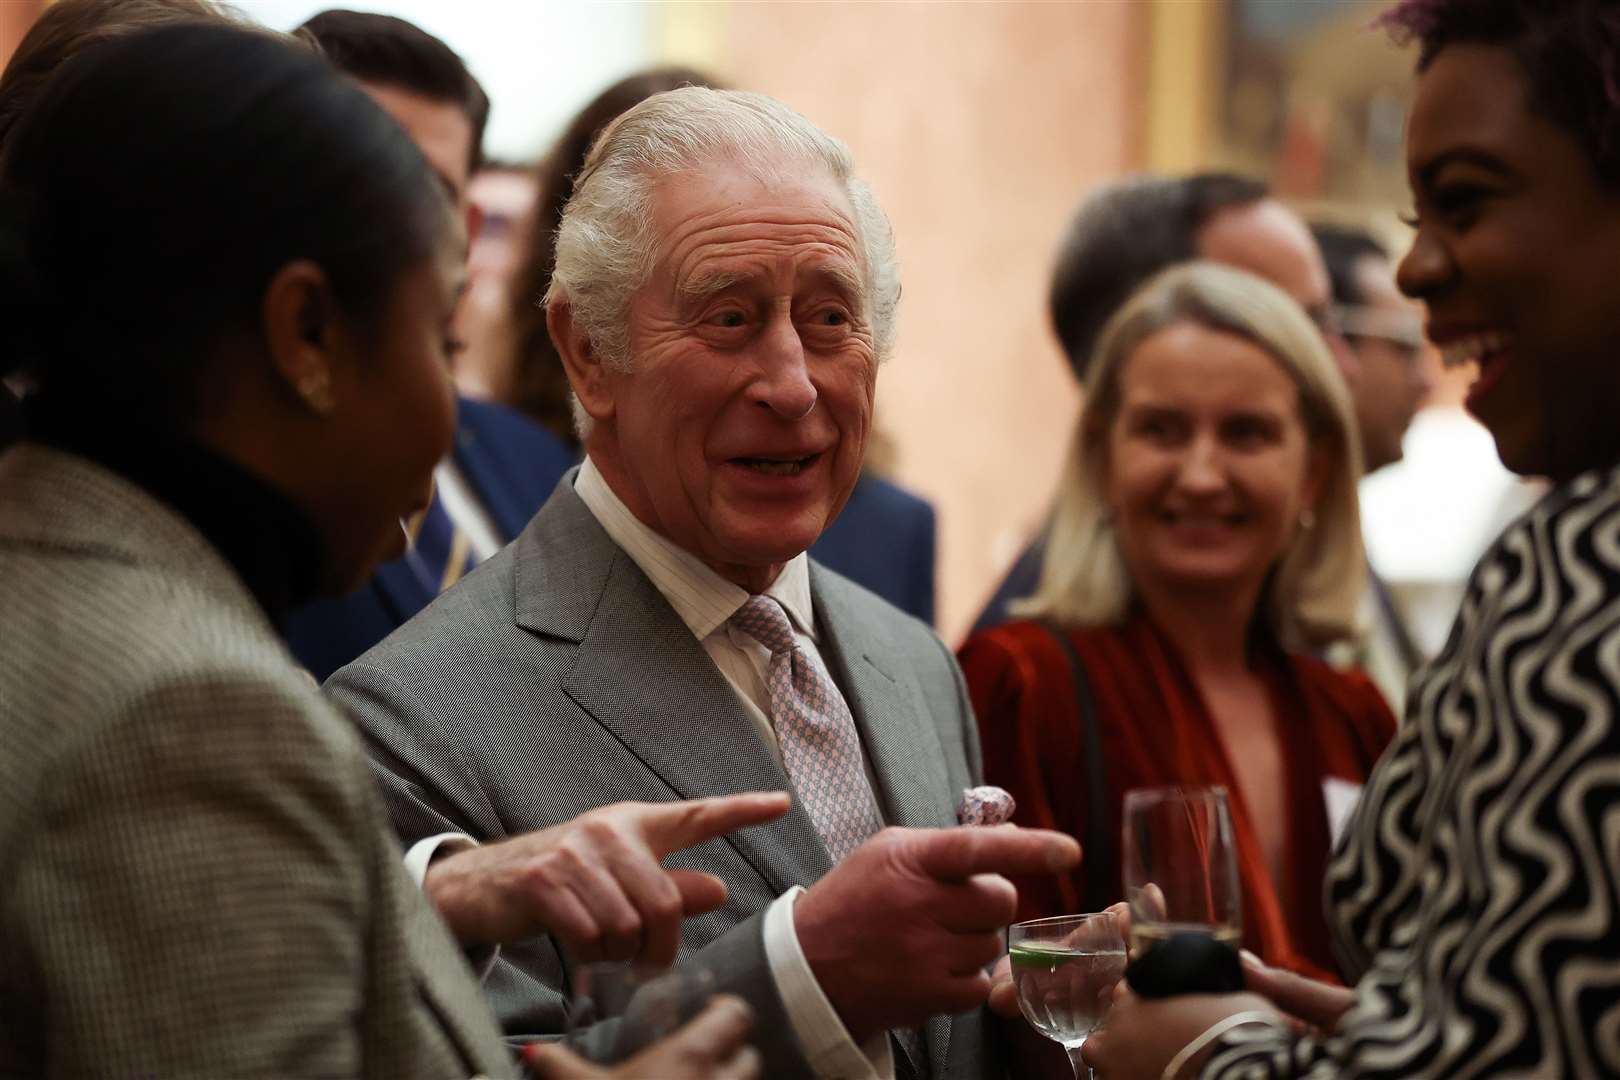 The King speaks to guests during a reception at Buckingham Palace (Isabel Infantes/PA)